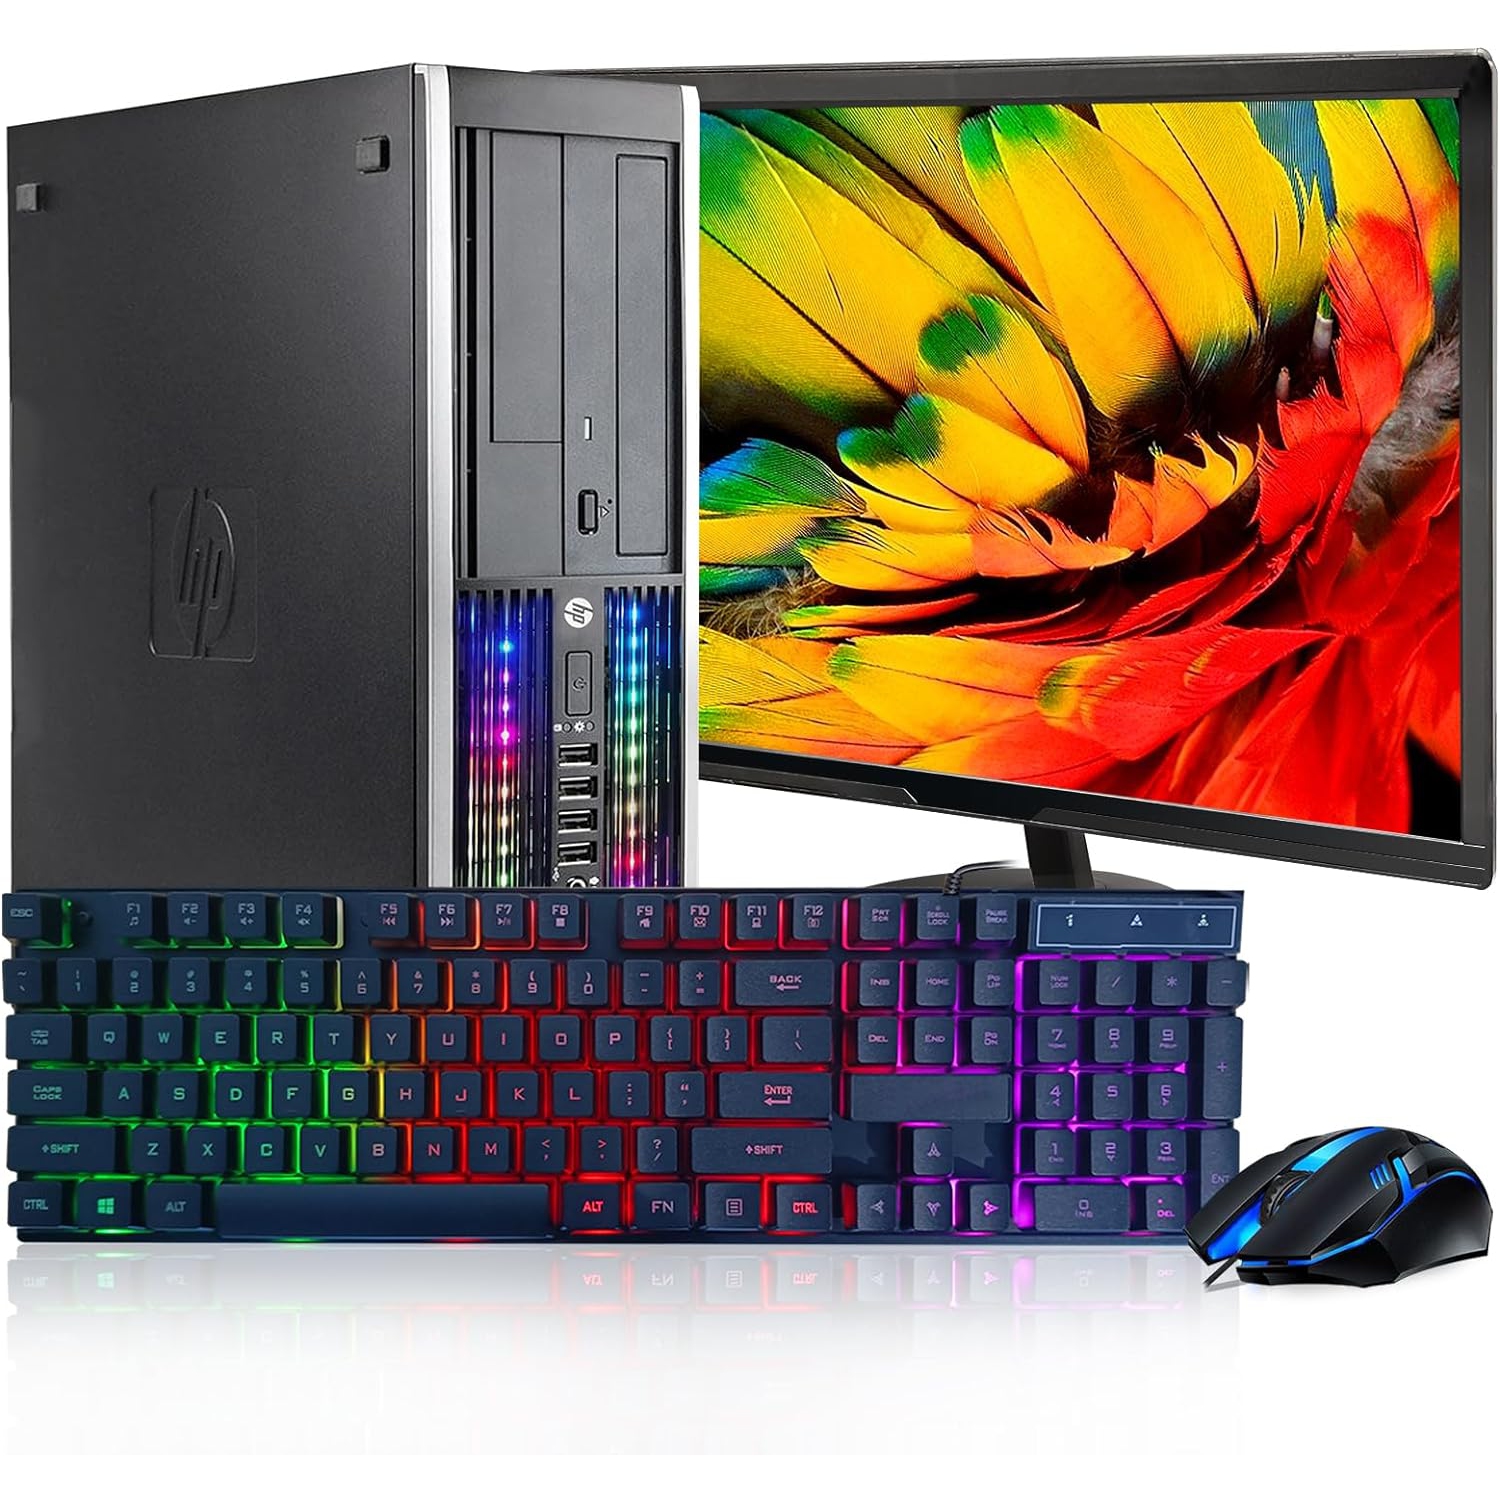 HP RGB Gaming Desktop Computer, Intel Core I7 up to 3.9G, GTX 750 Ti 4G, 16G, 512G SSD, 600M WiFi, BT, RGB Keyboard & Mouse, New 22" 1080 FHD LED, W10P64 - Refurbished Excellent